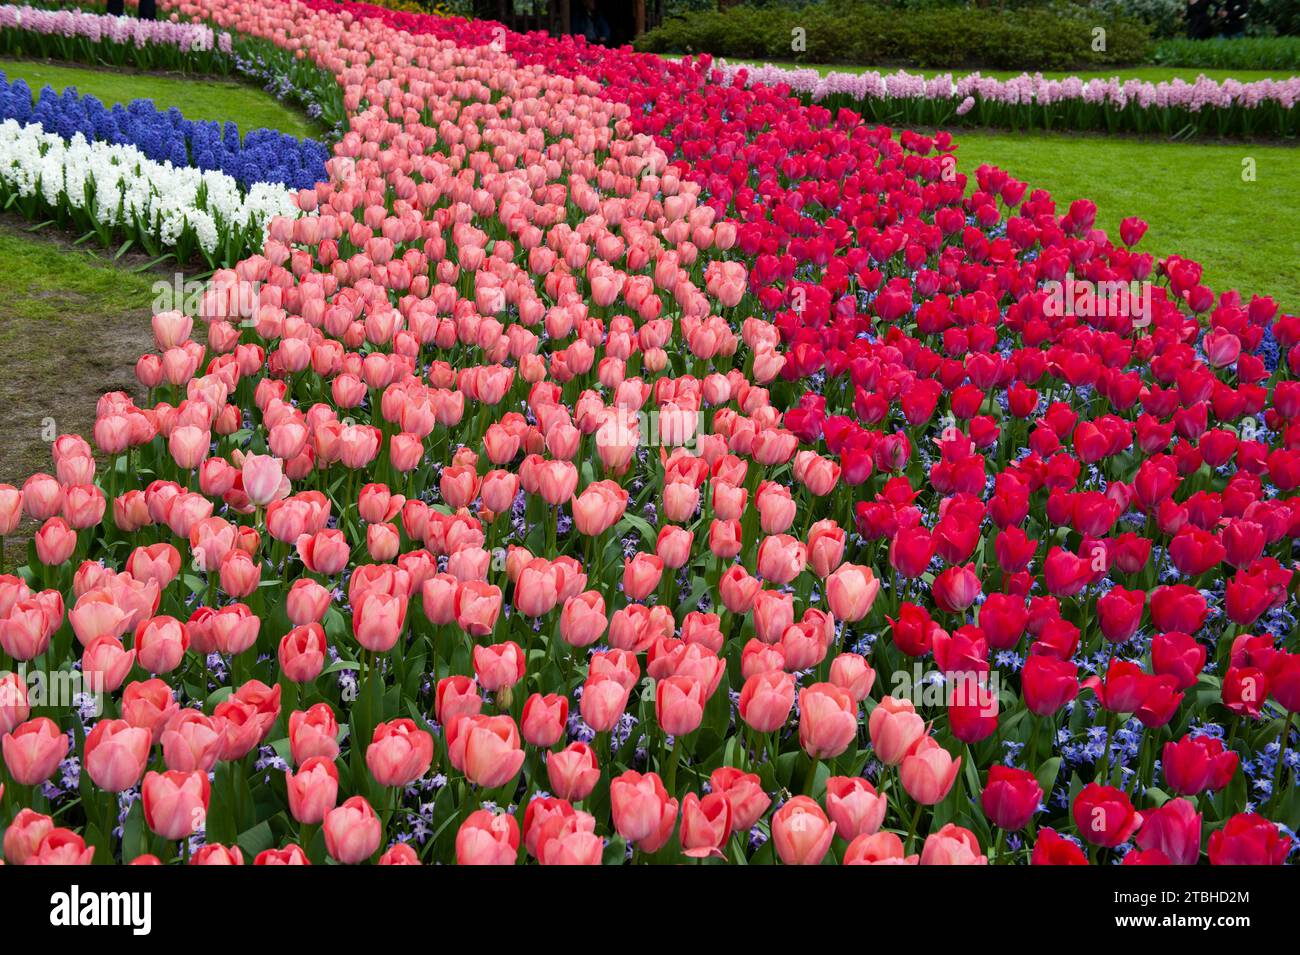 A section of the colorful and immaculately landscaped tulip and flower Keukenhof Gardens in Lisse, Netherlands. Stock Photo